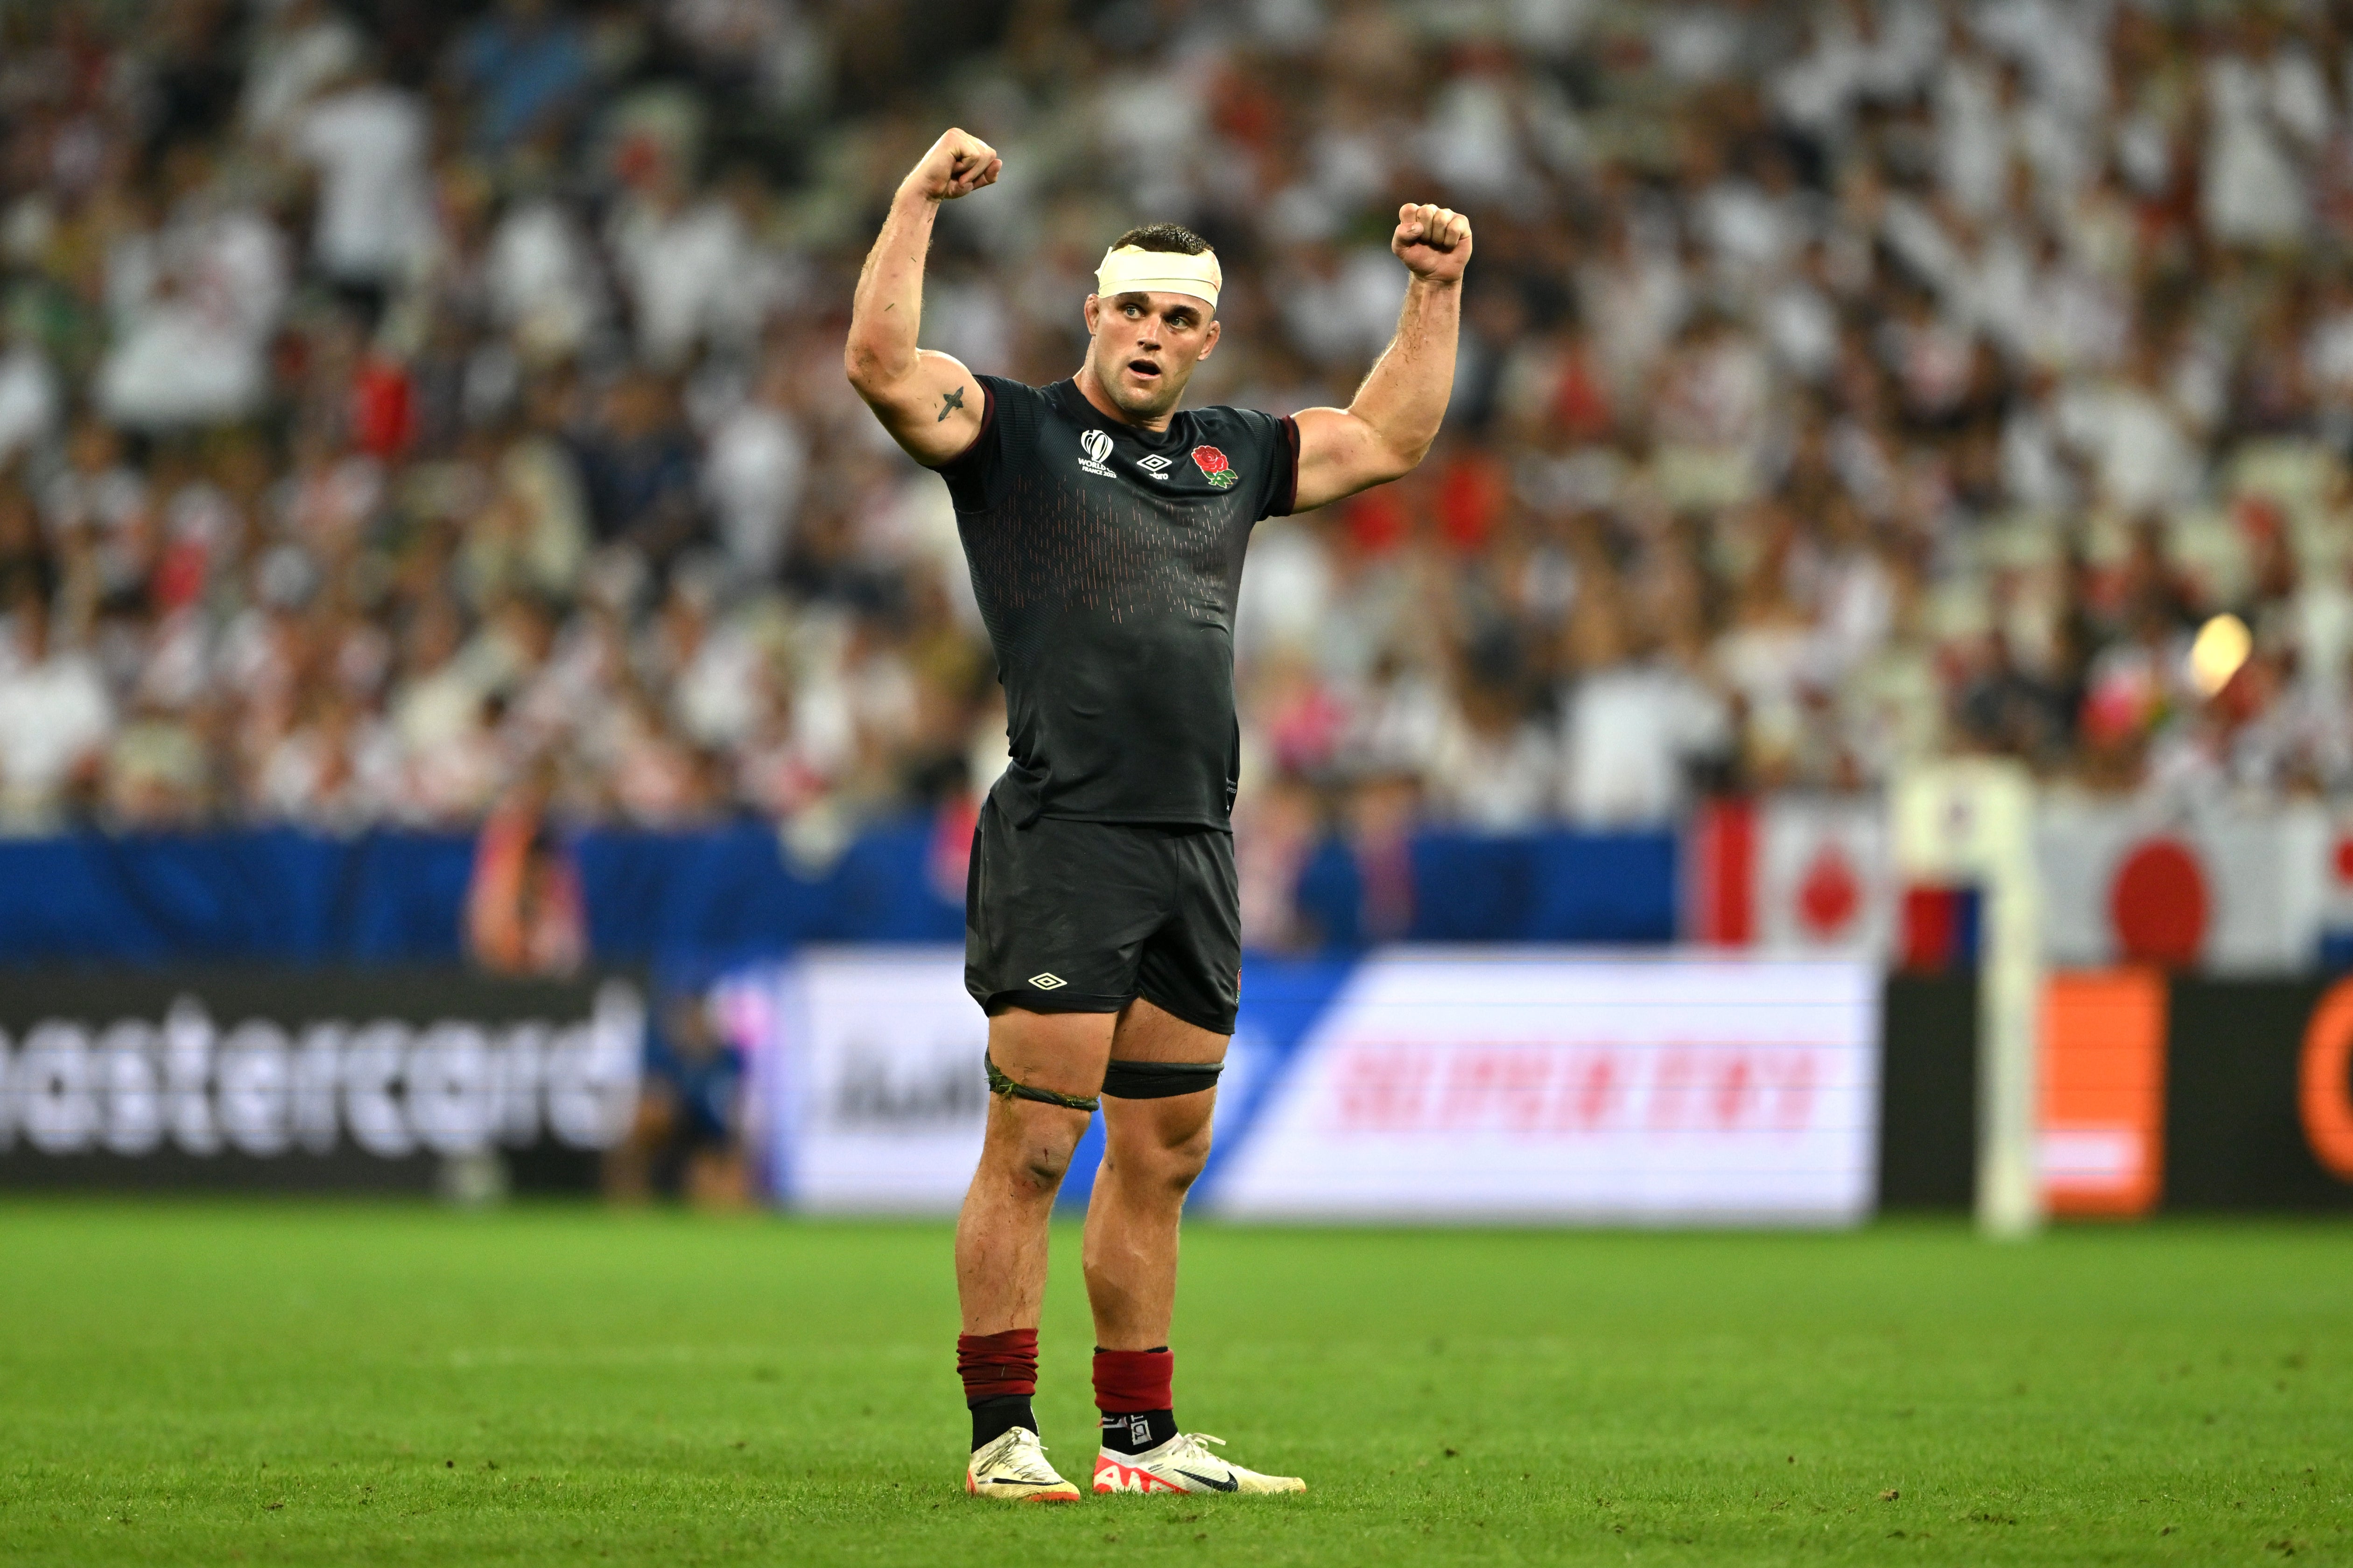 Ben Earl starts at number eight for England against Fiji